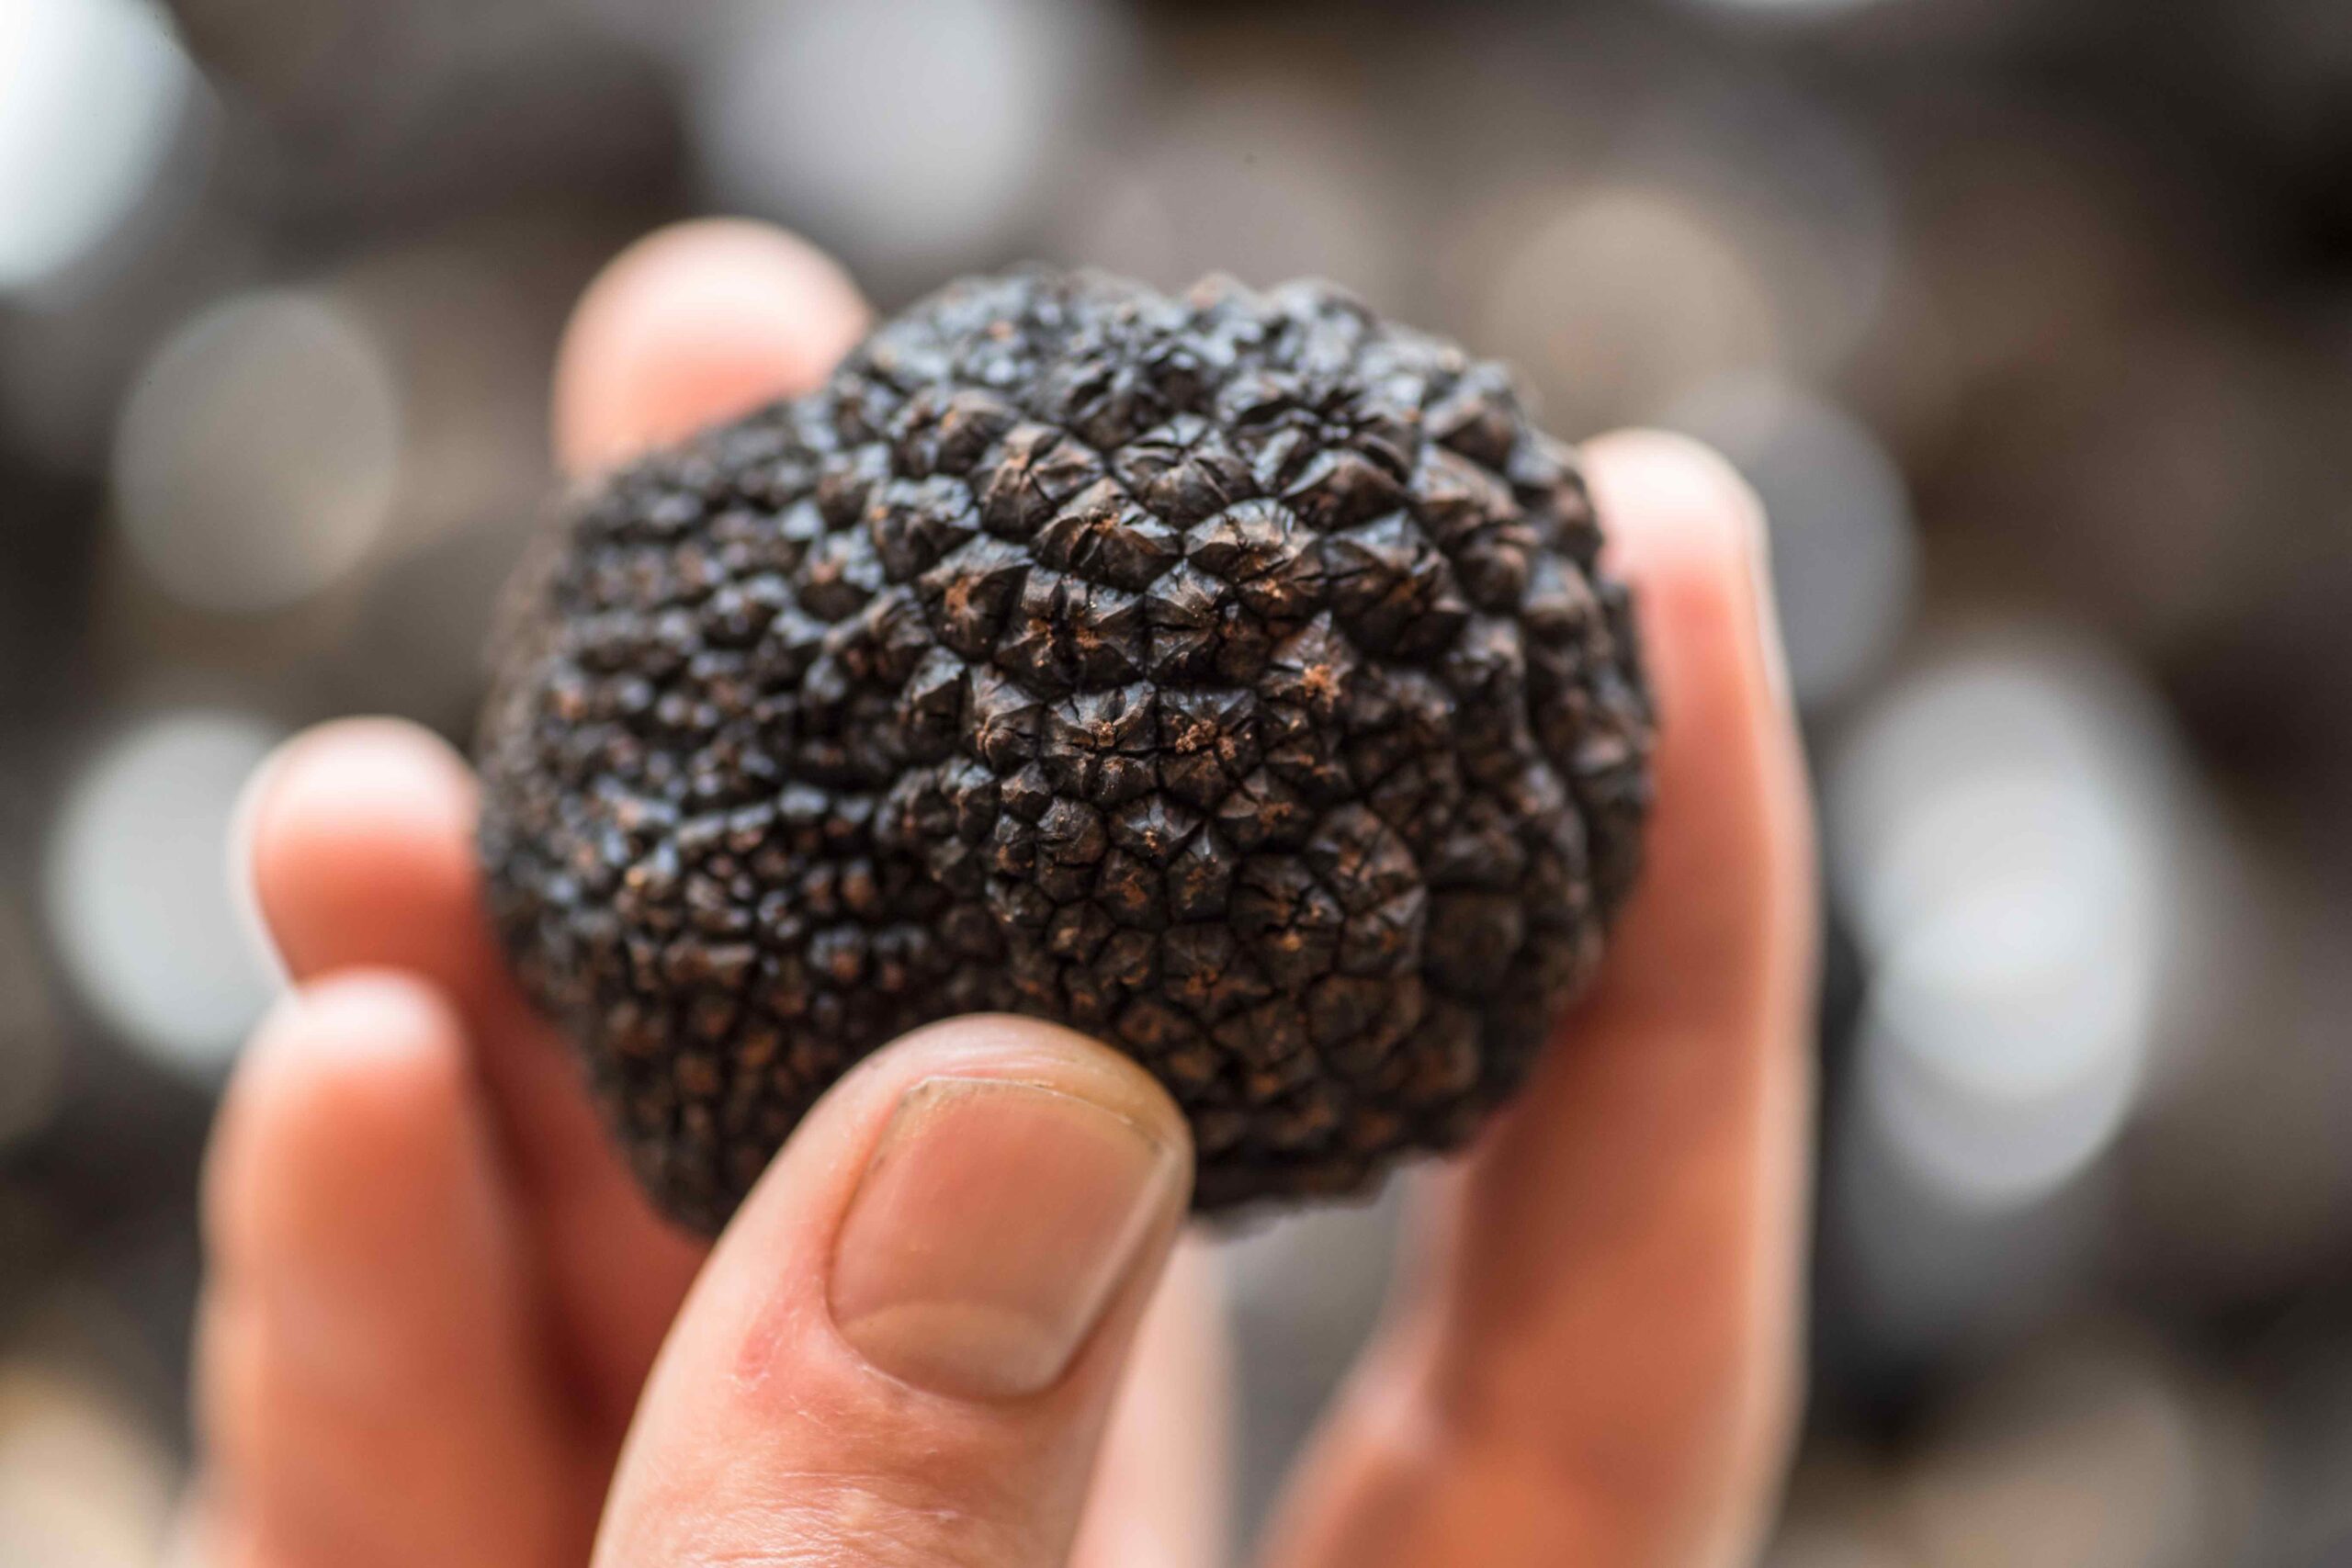 Truffle tour and tasting with TasTruffles